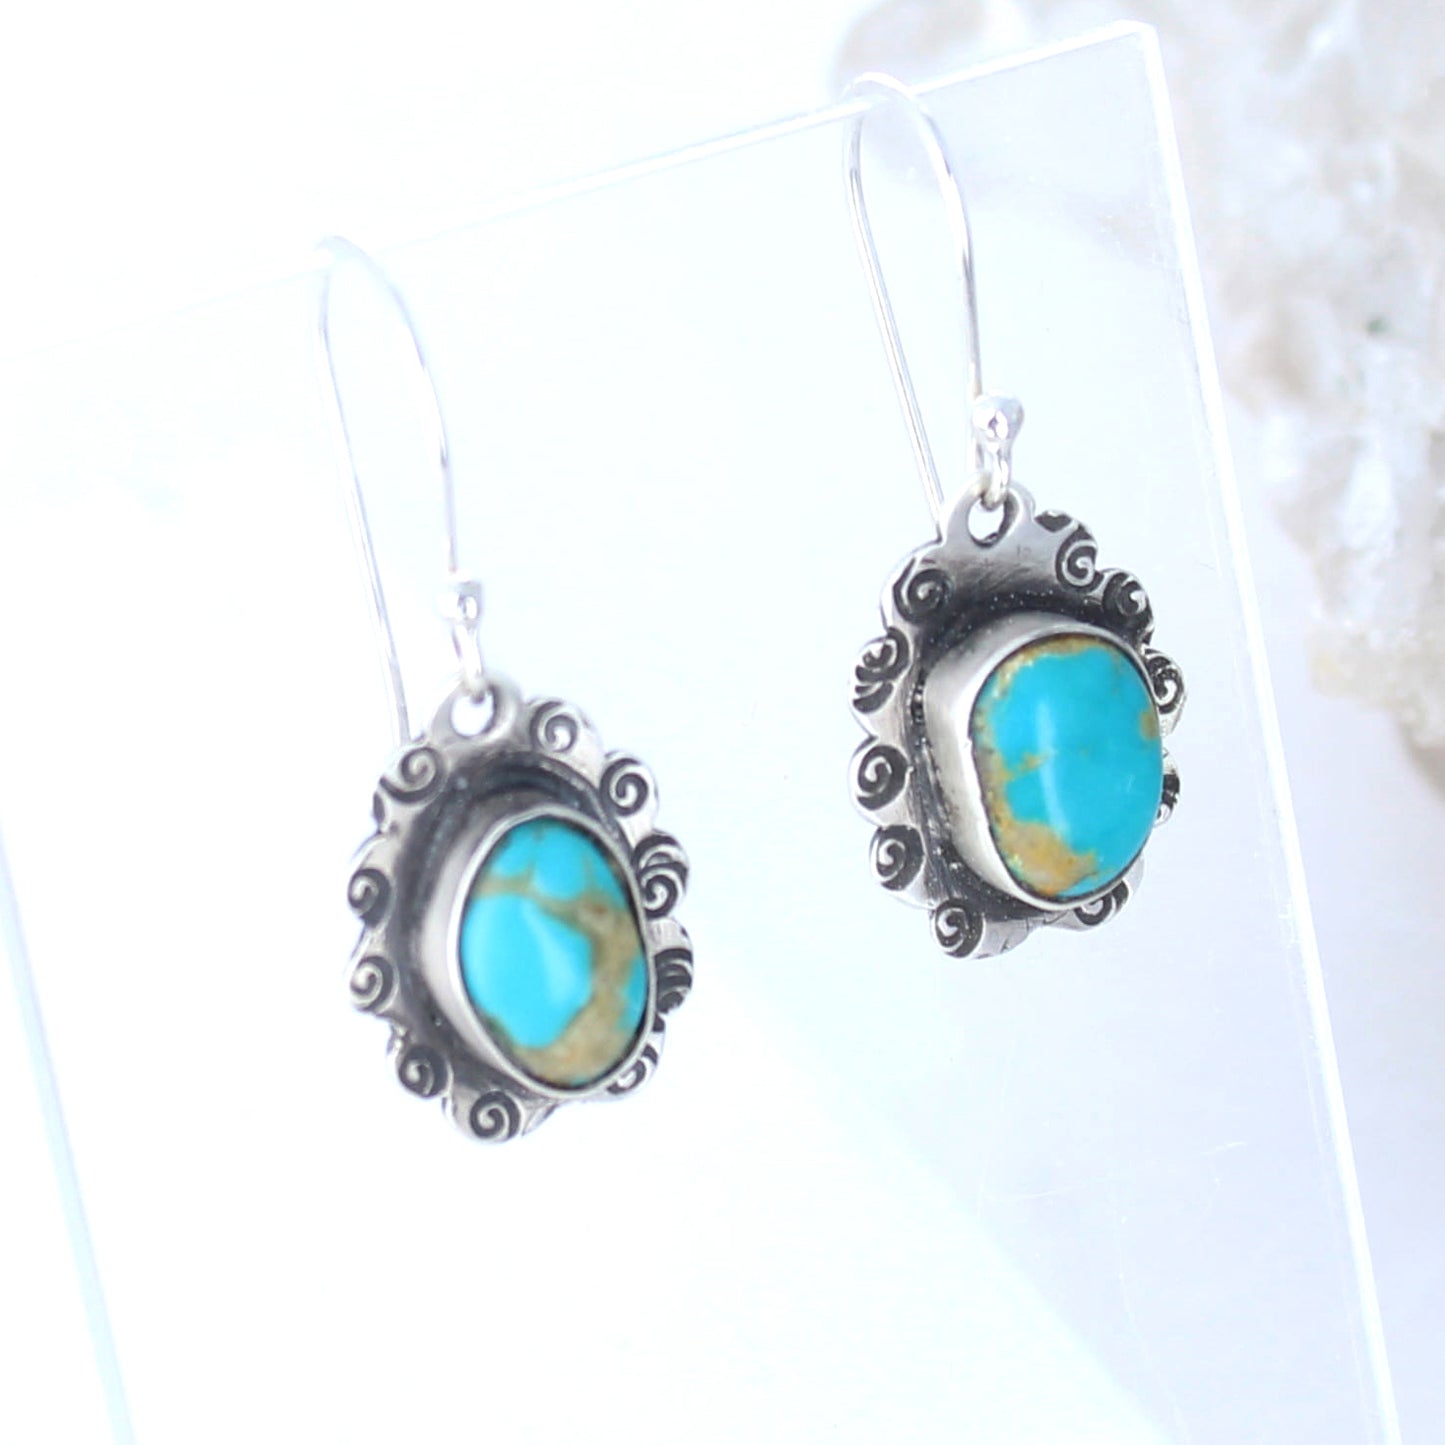 Hachita New Mexico Turquoise Earrings Sterling Silver